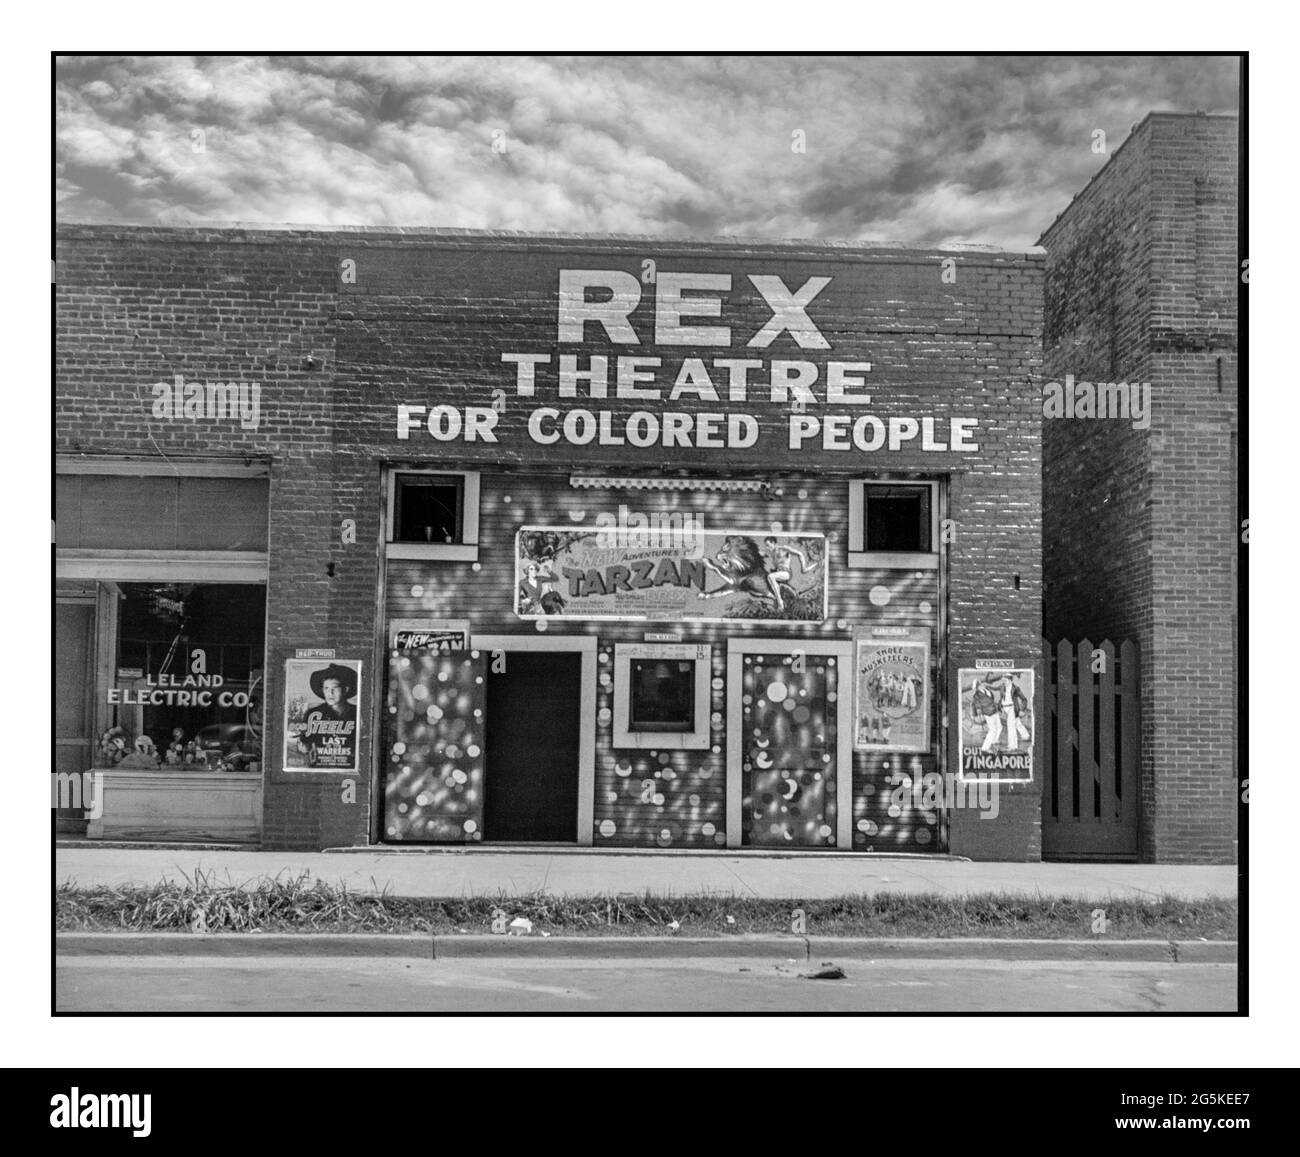 'REX THEATRE FOR COLOURED PEOPLE' 1930's razzist Racial Division Seigation Sign USA with low Rise Small Brick Building Theatre in Leland, Mississippi 'for Coloured People' di Dorothea Lange, fotografo 1937 giugno. Foto Stock